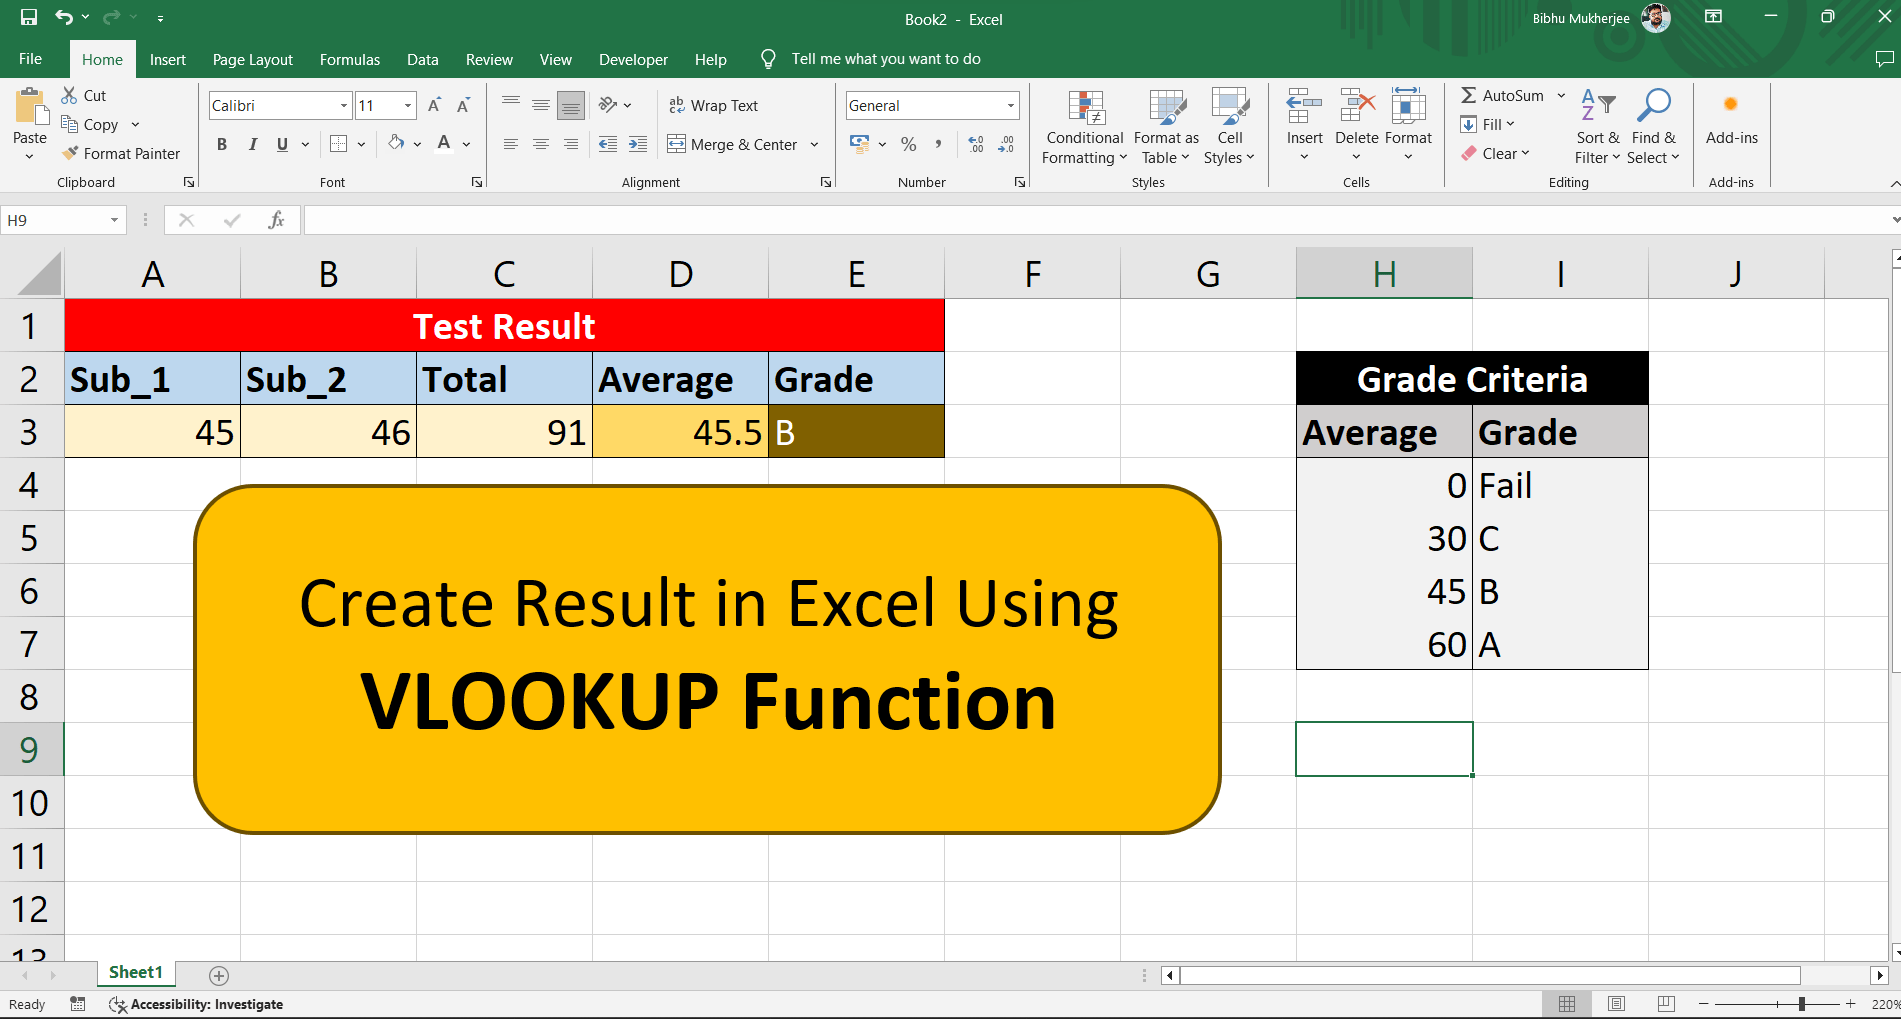 MS-Excel: Create Result or Grade using VLOOKUP function